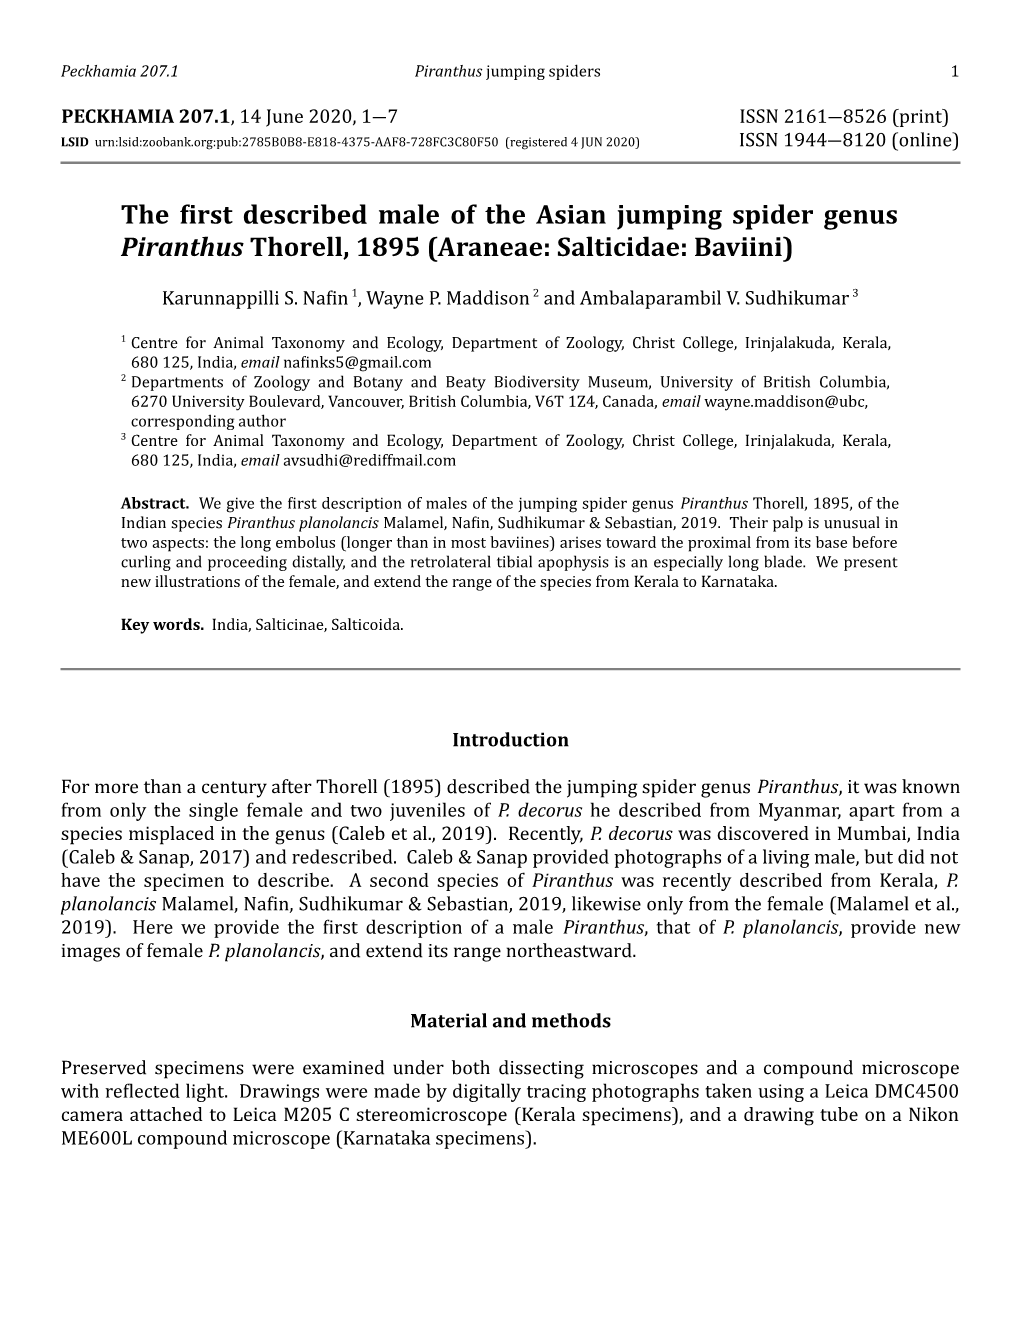 The First Described Male of the Asian Jumping Spider Genus Piranthus Thorell, 1895 (Araneae: Salticidae: Baviini)